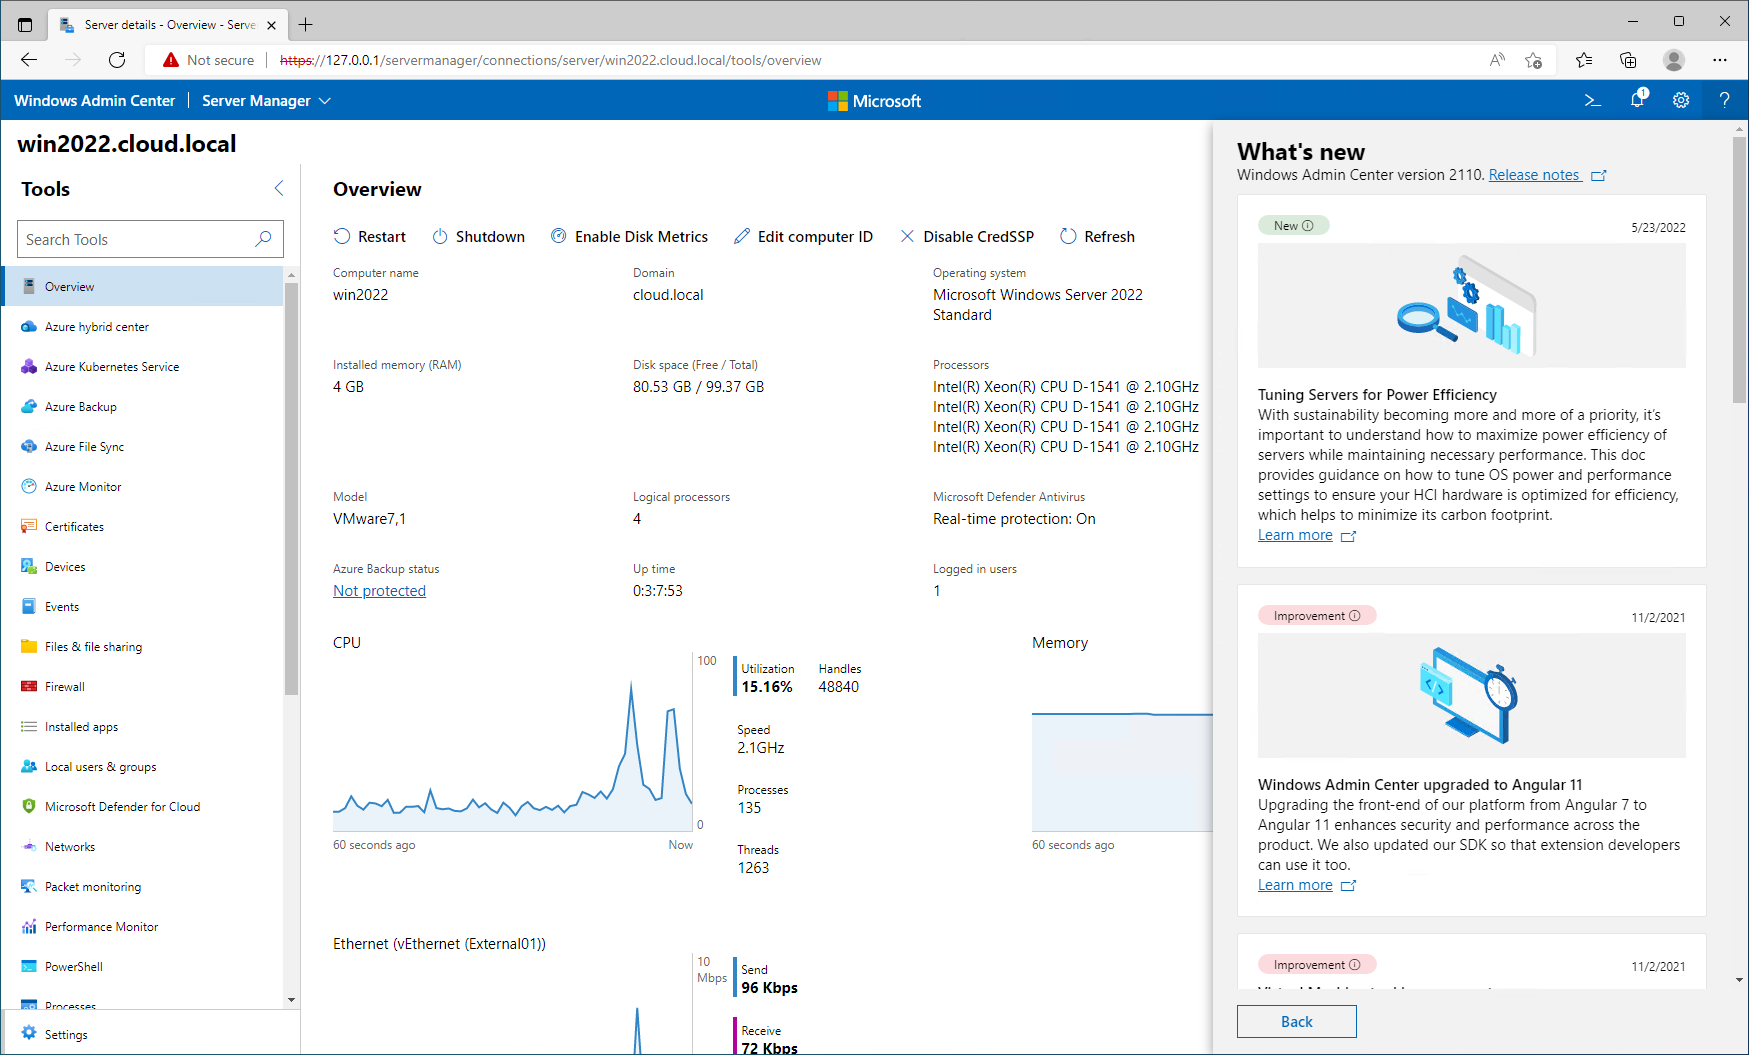 Windows Admin Center 2110.2 provides many new enhancements building on the 2110 release